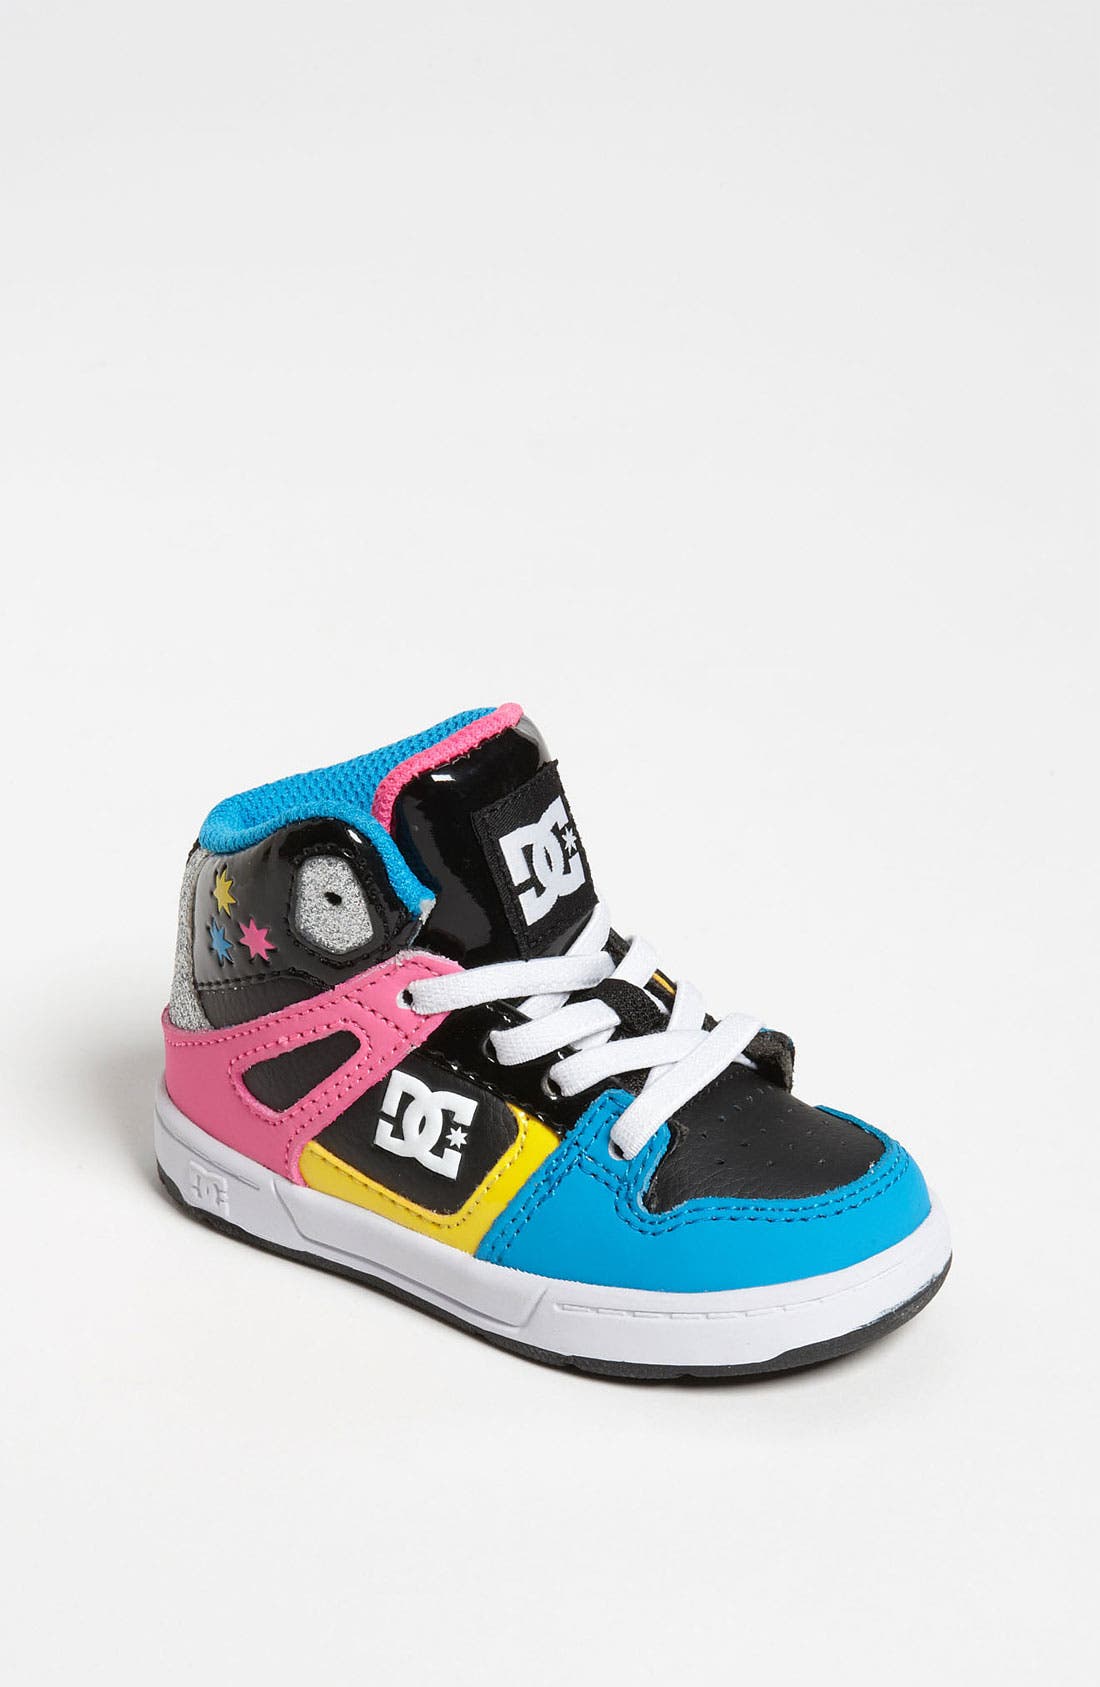 baby dc shoes